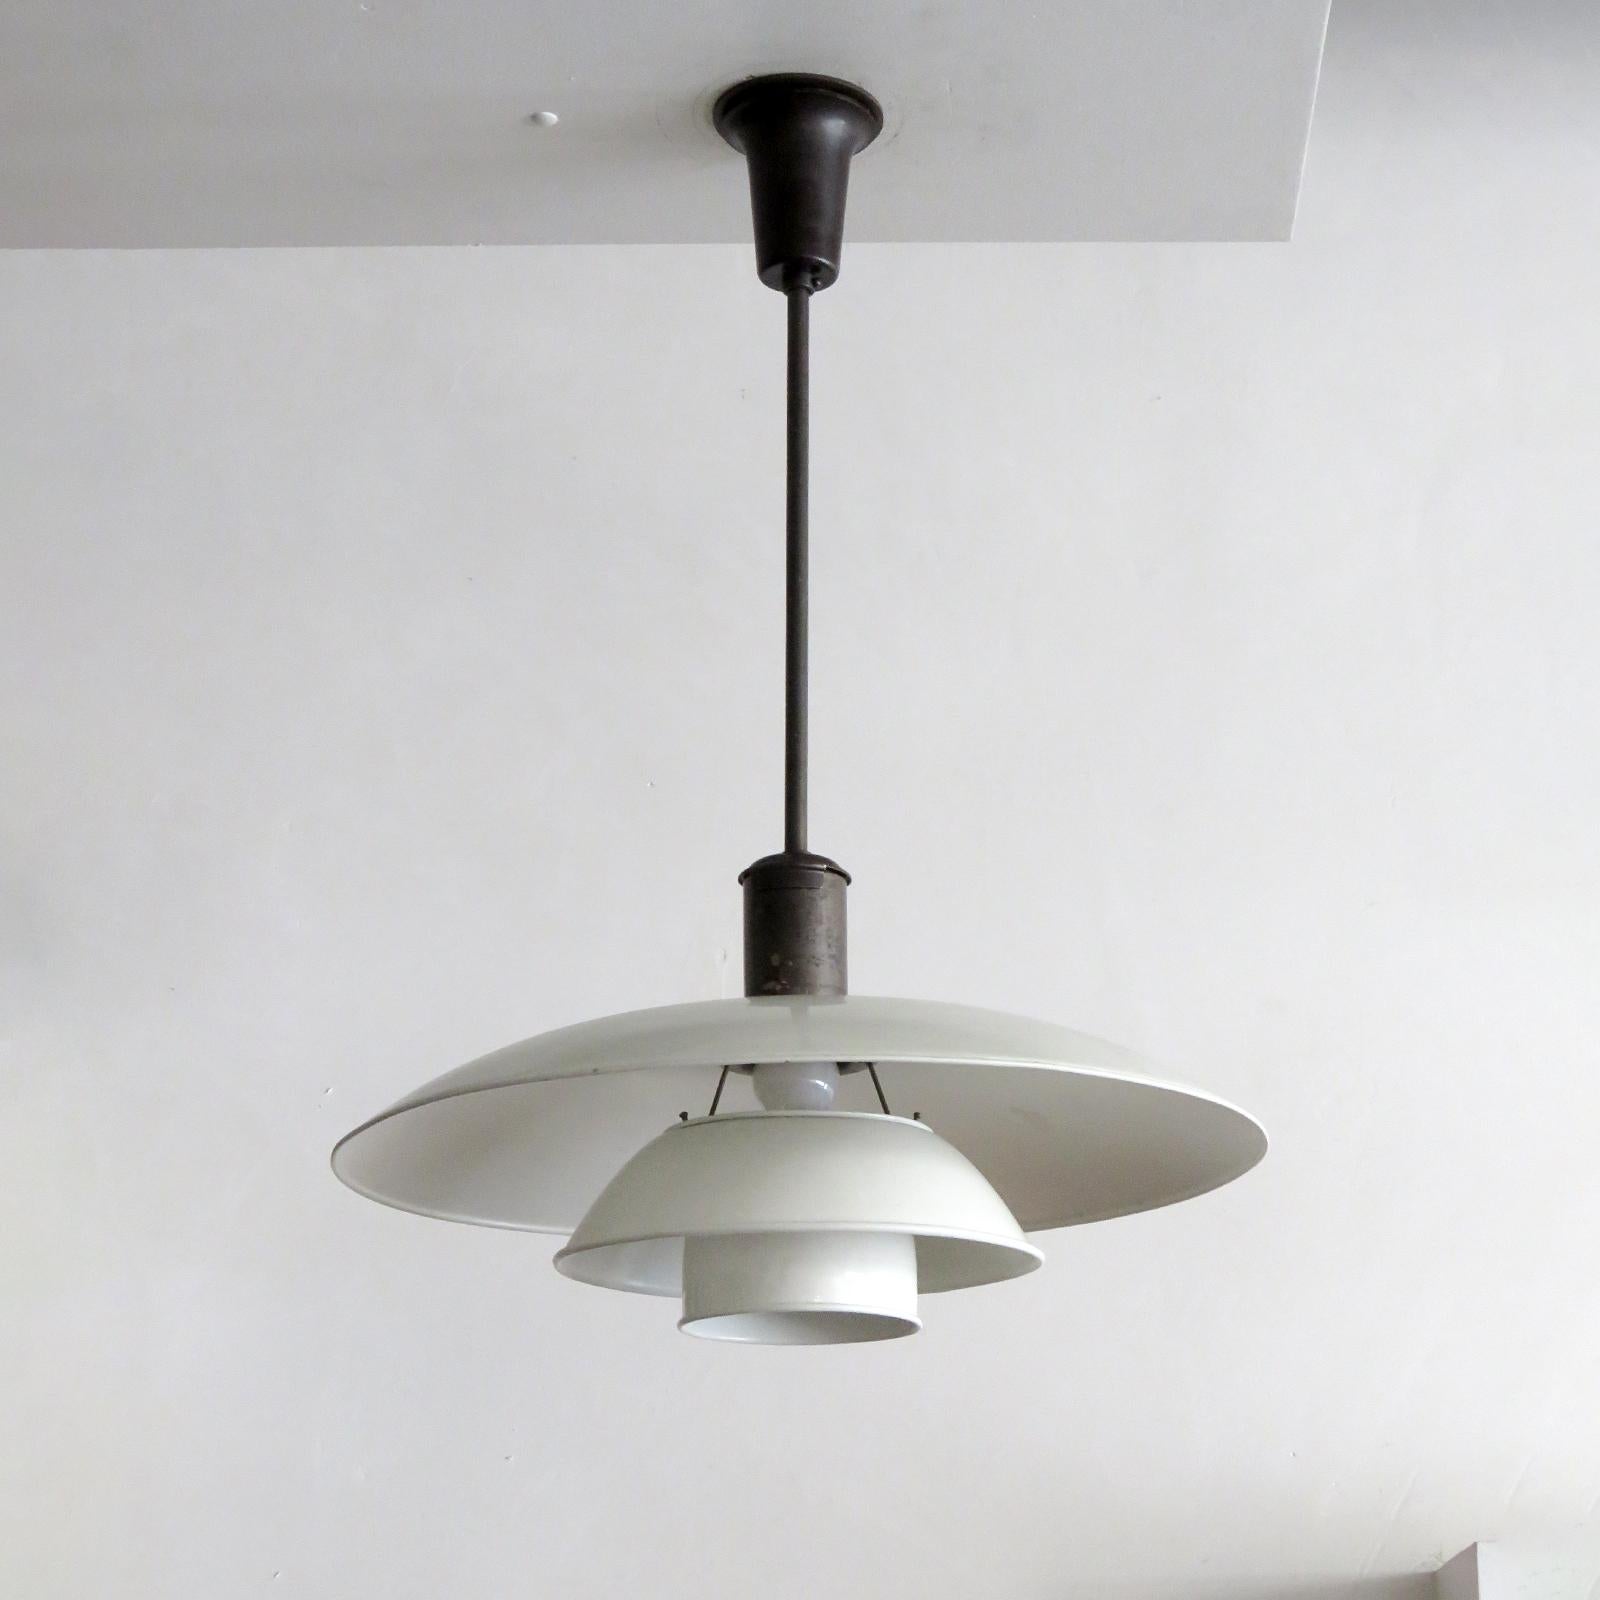 wonderful early 1930's PH 5/4 Pendant by Poul Henningsen for Louis Poulsen with white enameled metal shade set, patinaed brass bayonet shade holder and bakelite canopy, stamped ph-4 patented, some dents and wear, wired for US standards, one E27